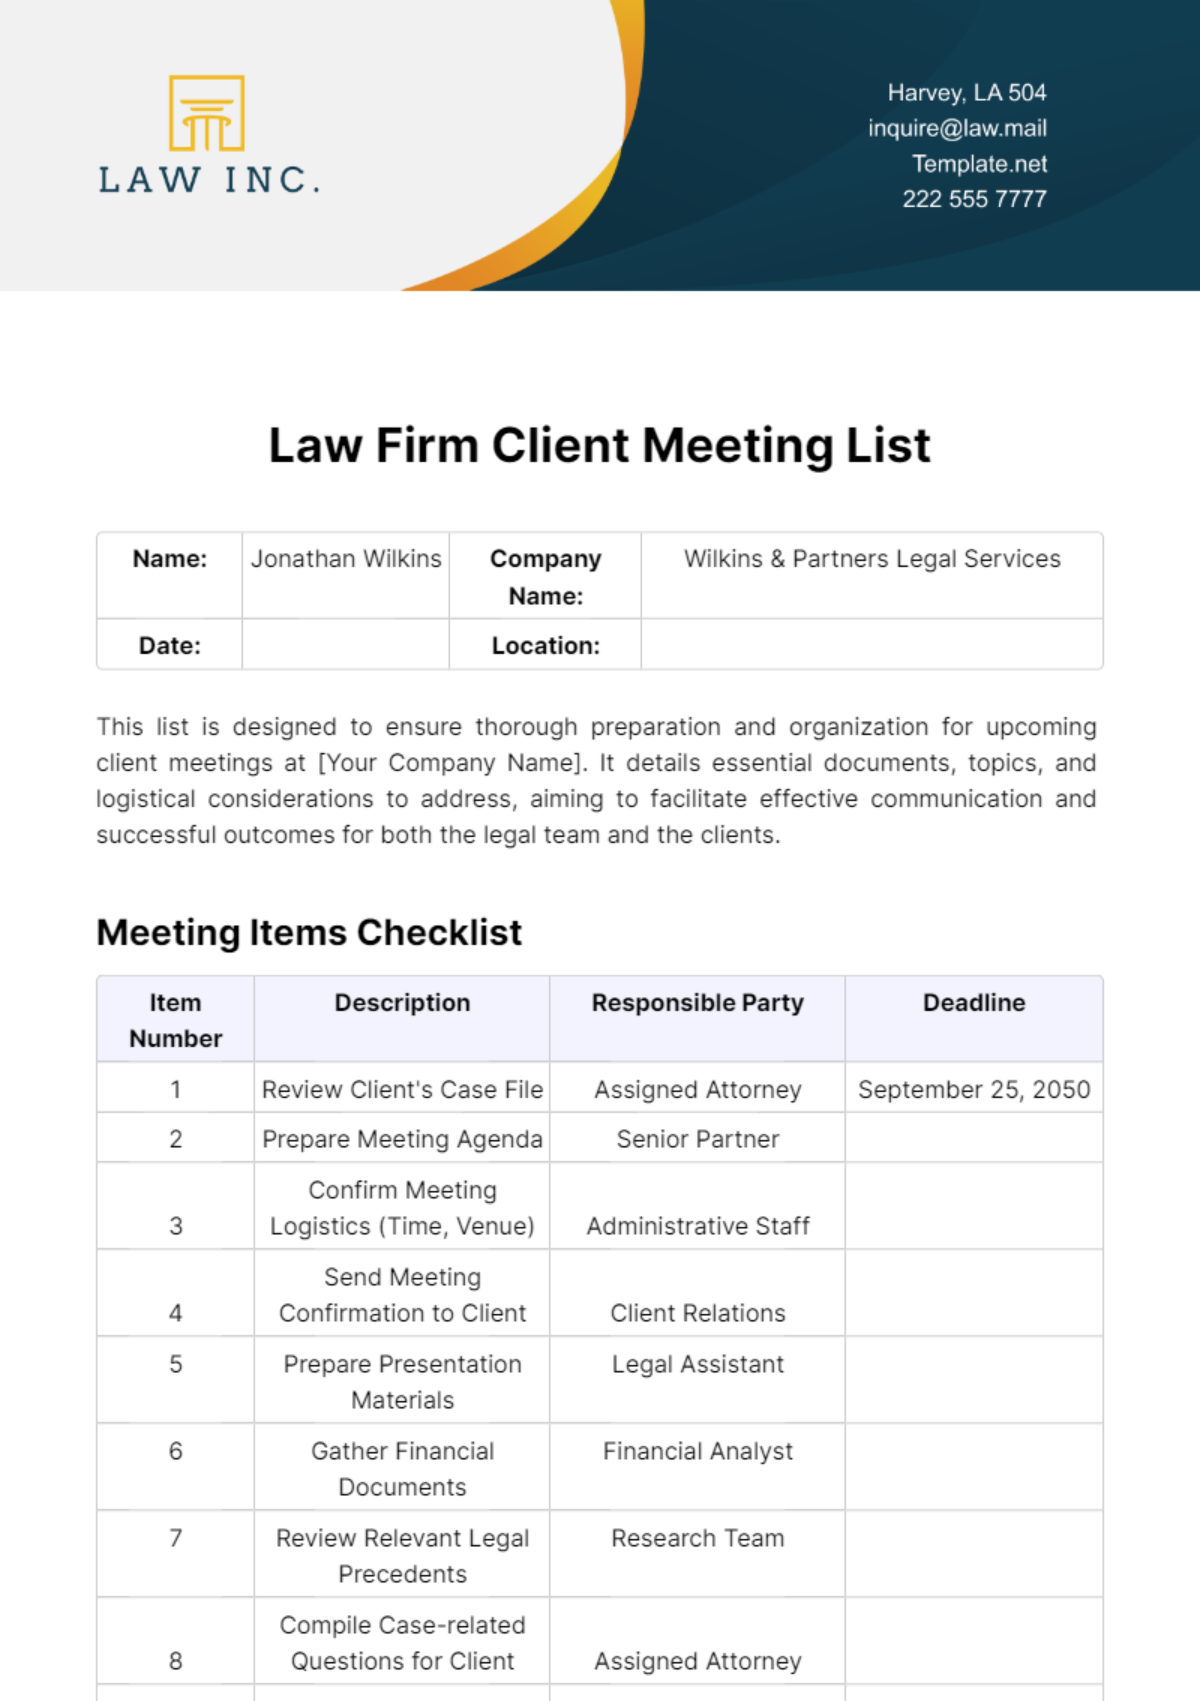 Law Firm Client Meeting List Template